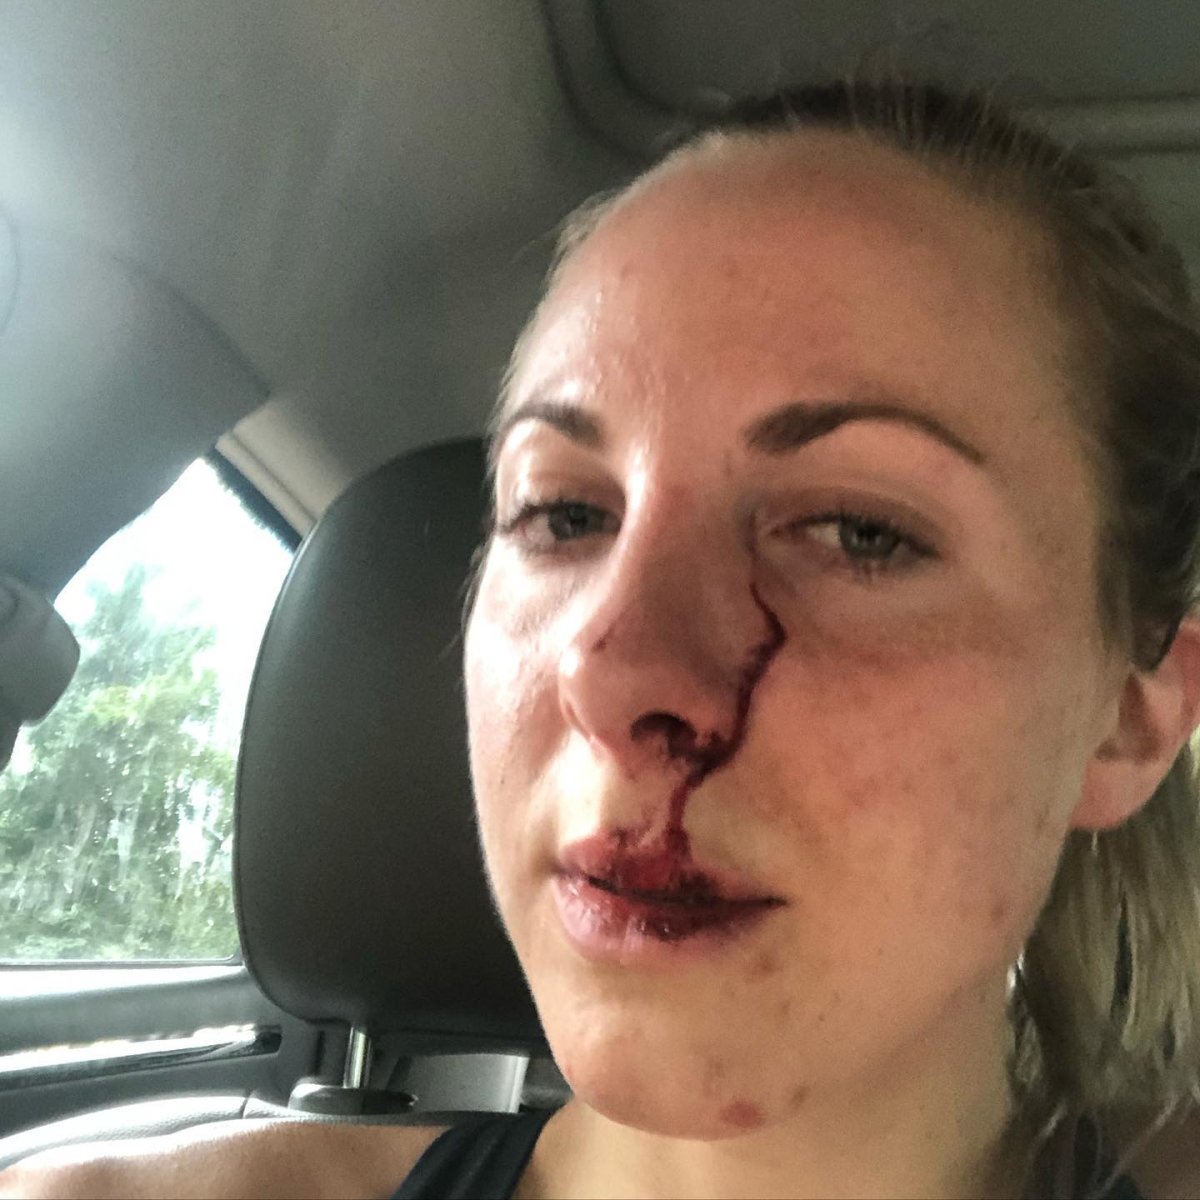 Erin Mckenzie says she's lucky to be alive after an encounter with a black bear in Riding Mountain National Park Monday.